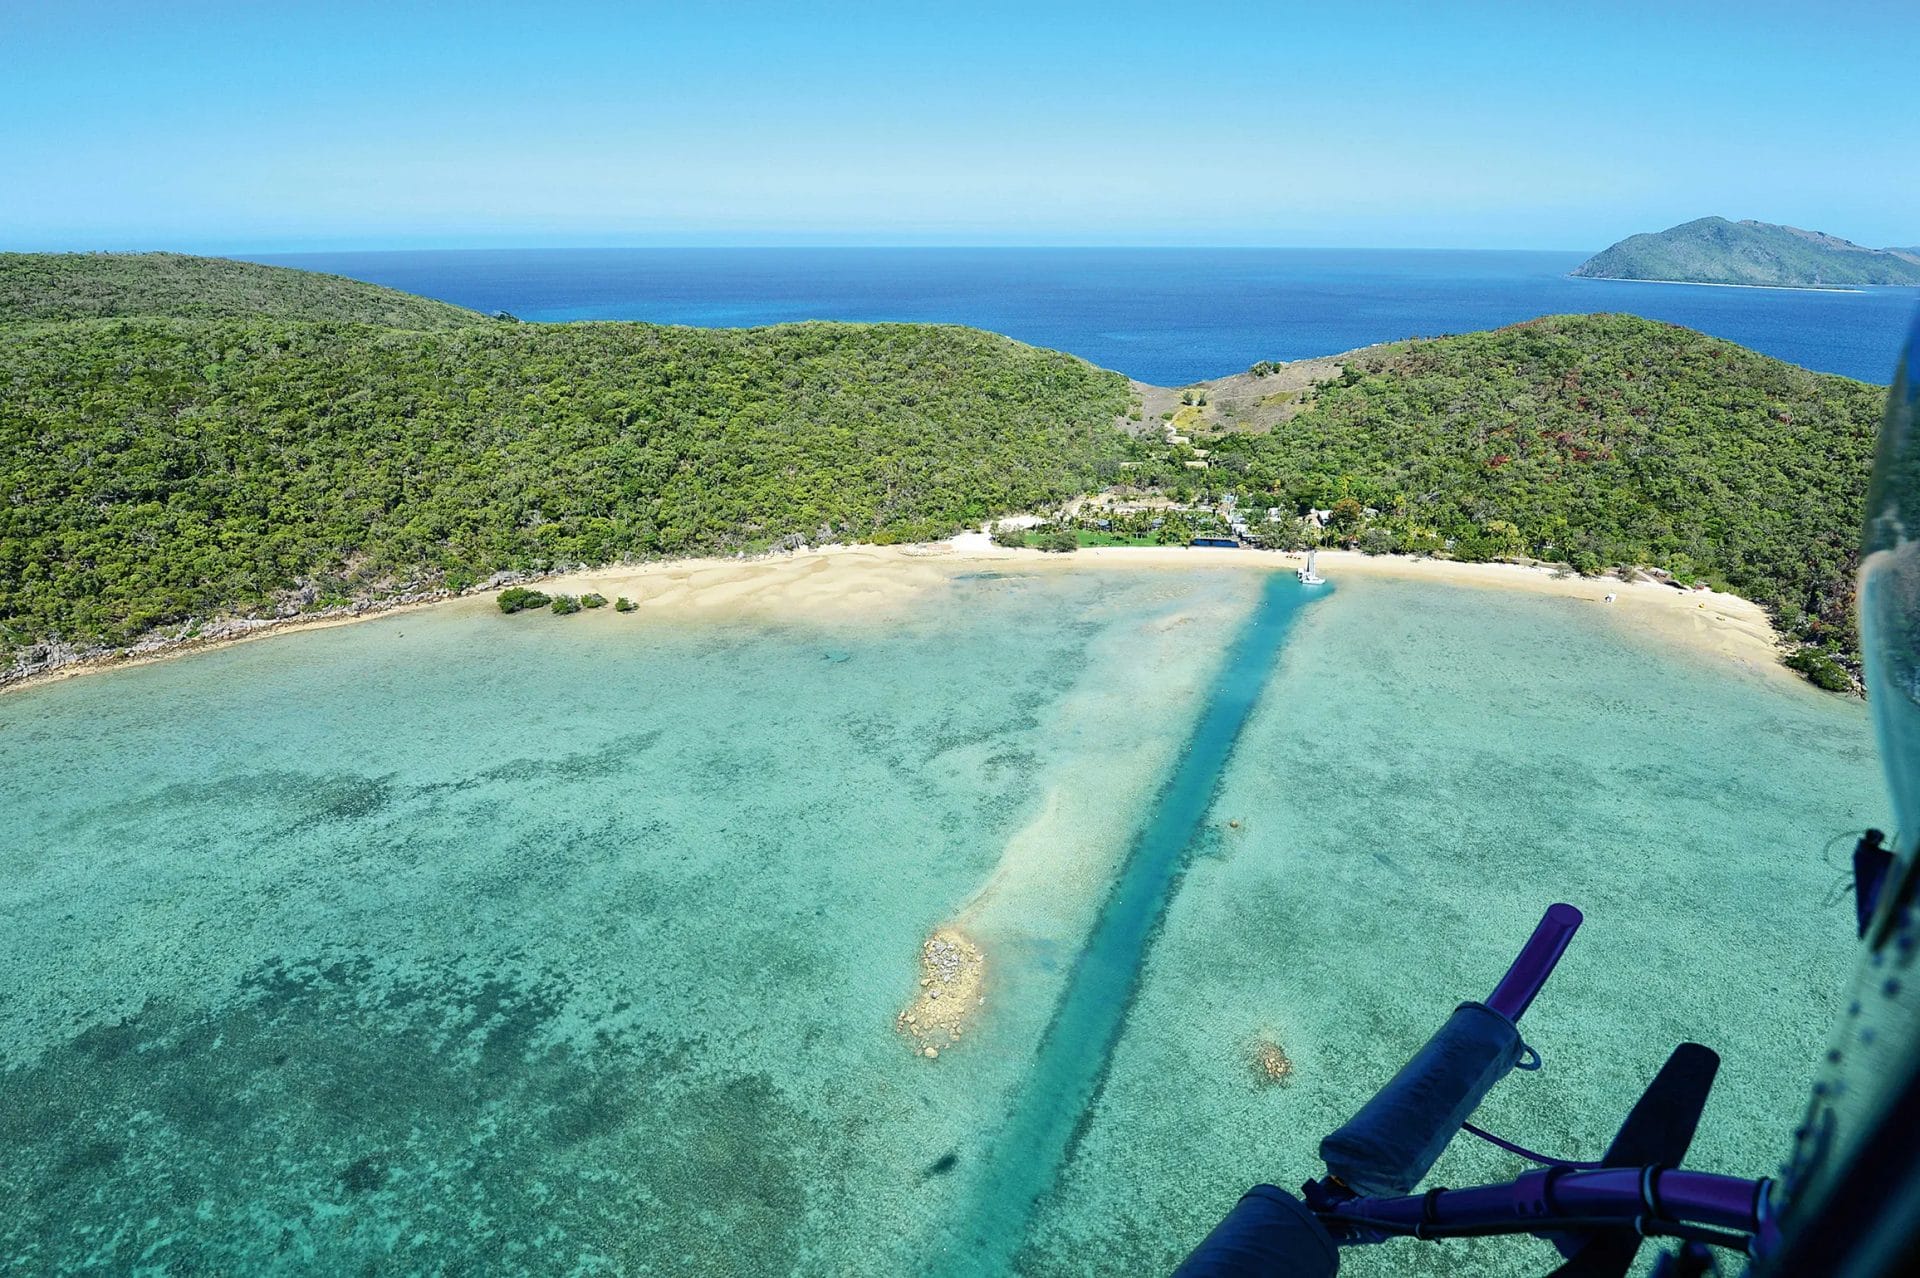 Aerial of Orpheus Island beach and ocean from helicopter.